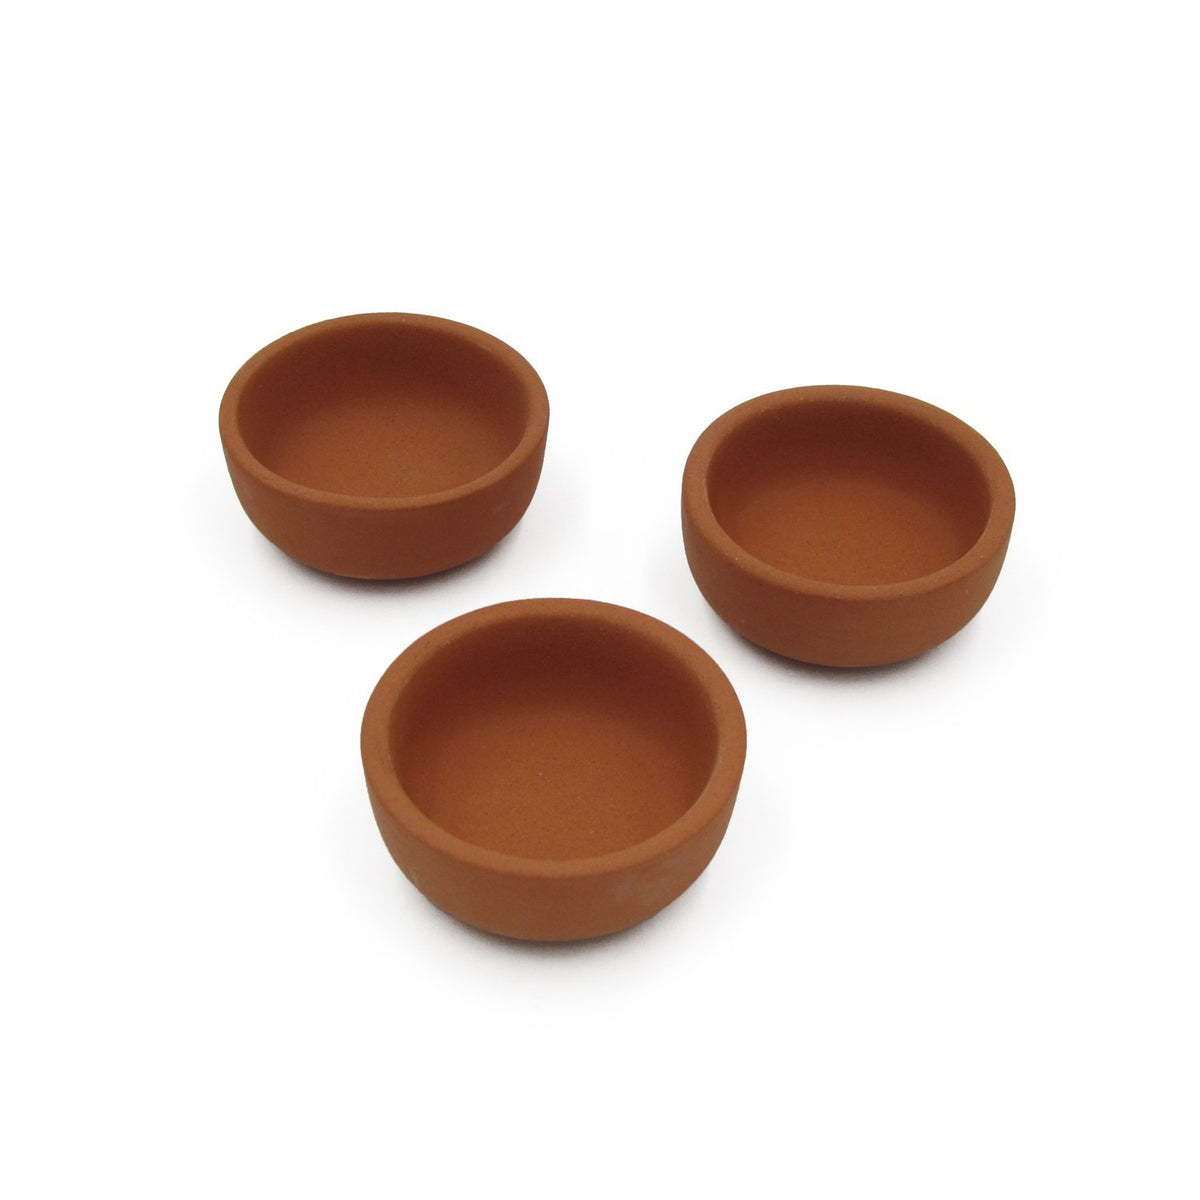 Terracotta Tealight candle holders - Set of 3